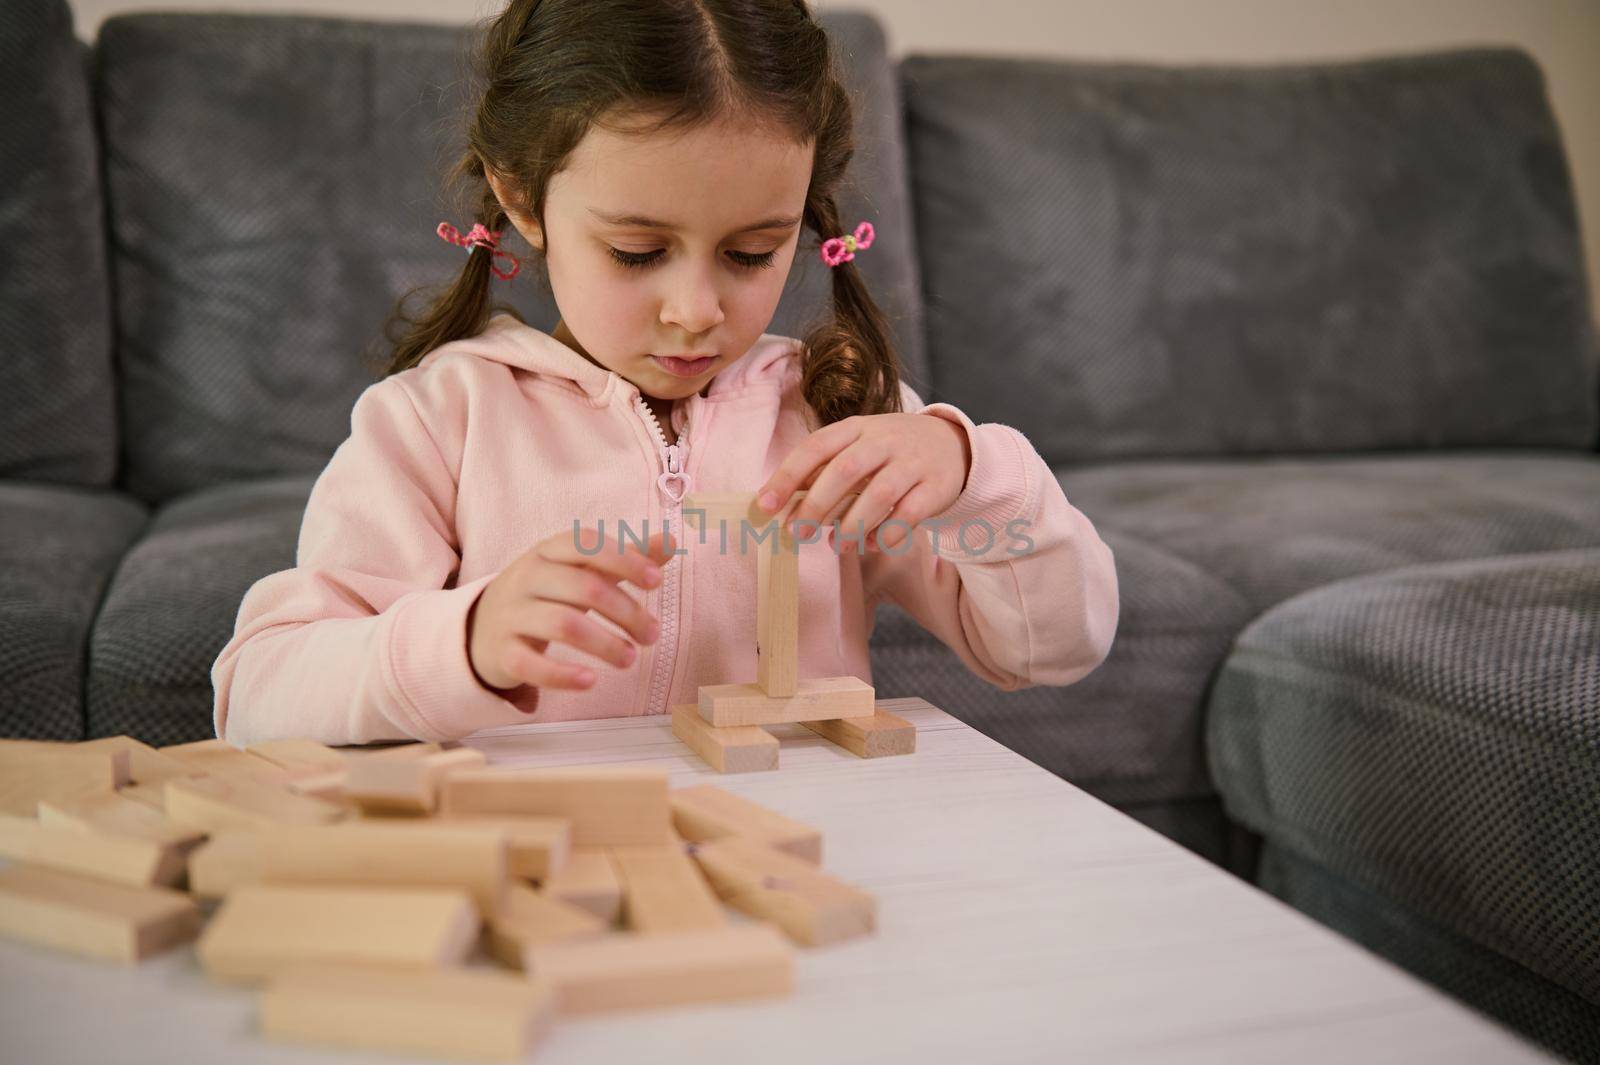 Adorable little girl with two pigtails, dressed in pink sweatshirt playing board game, building wooden constructions with blocks. Hand movement control and building computational skills concept.